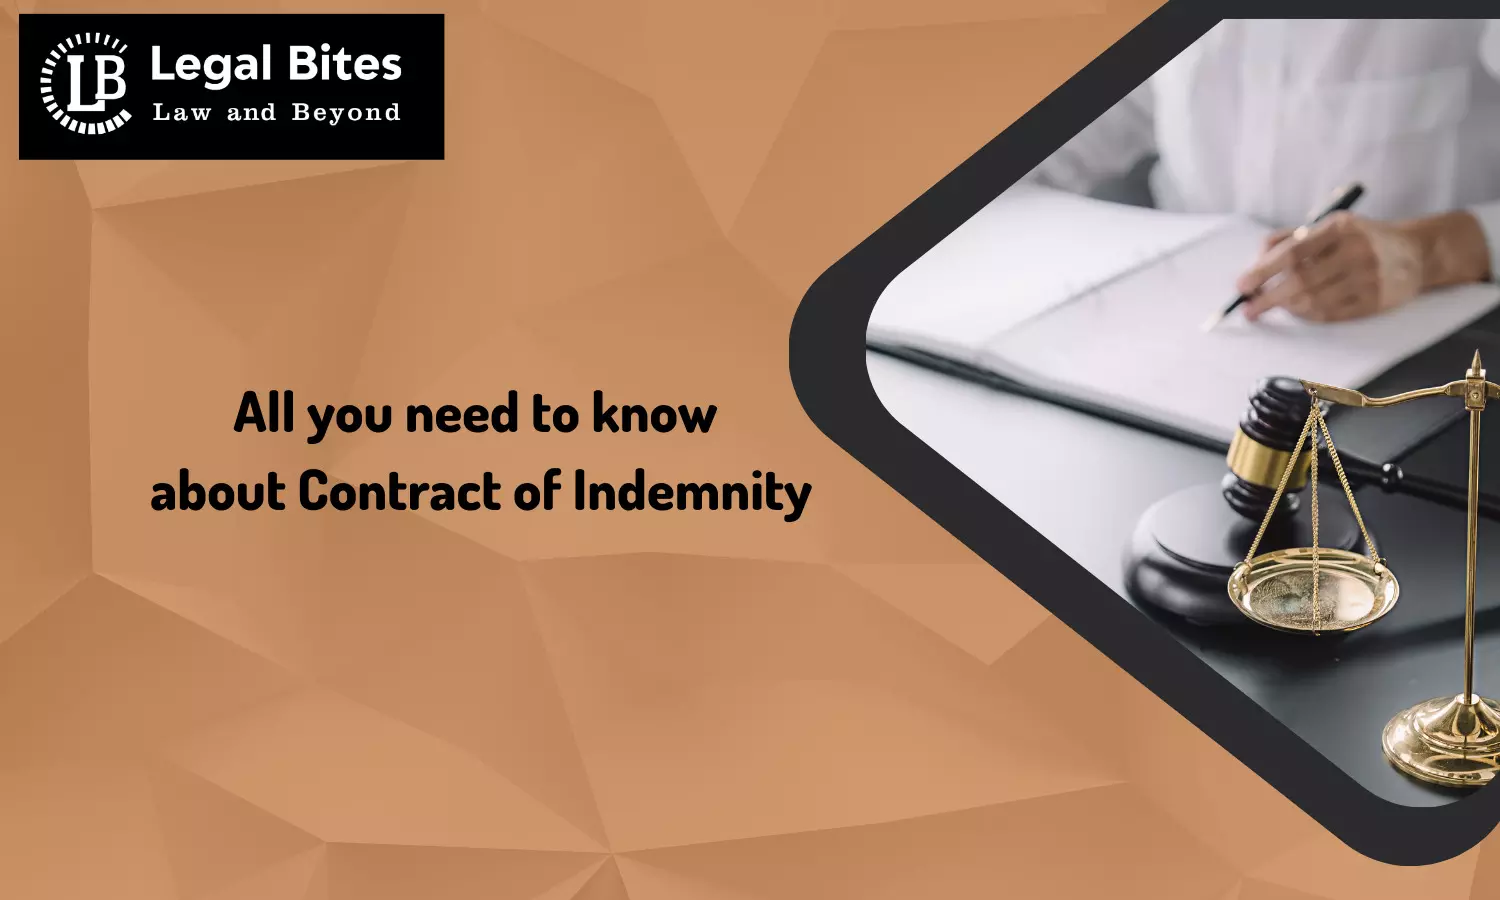 All you need to know about Contract of Indemnity